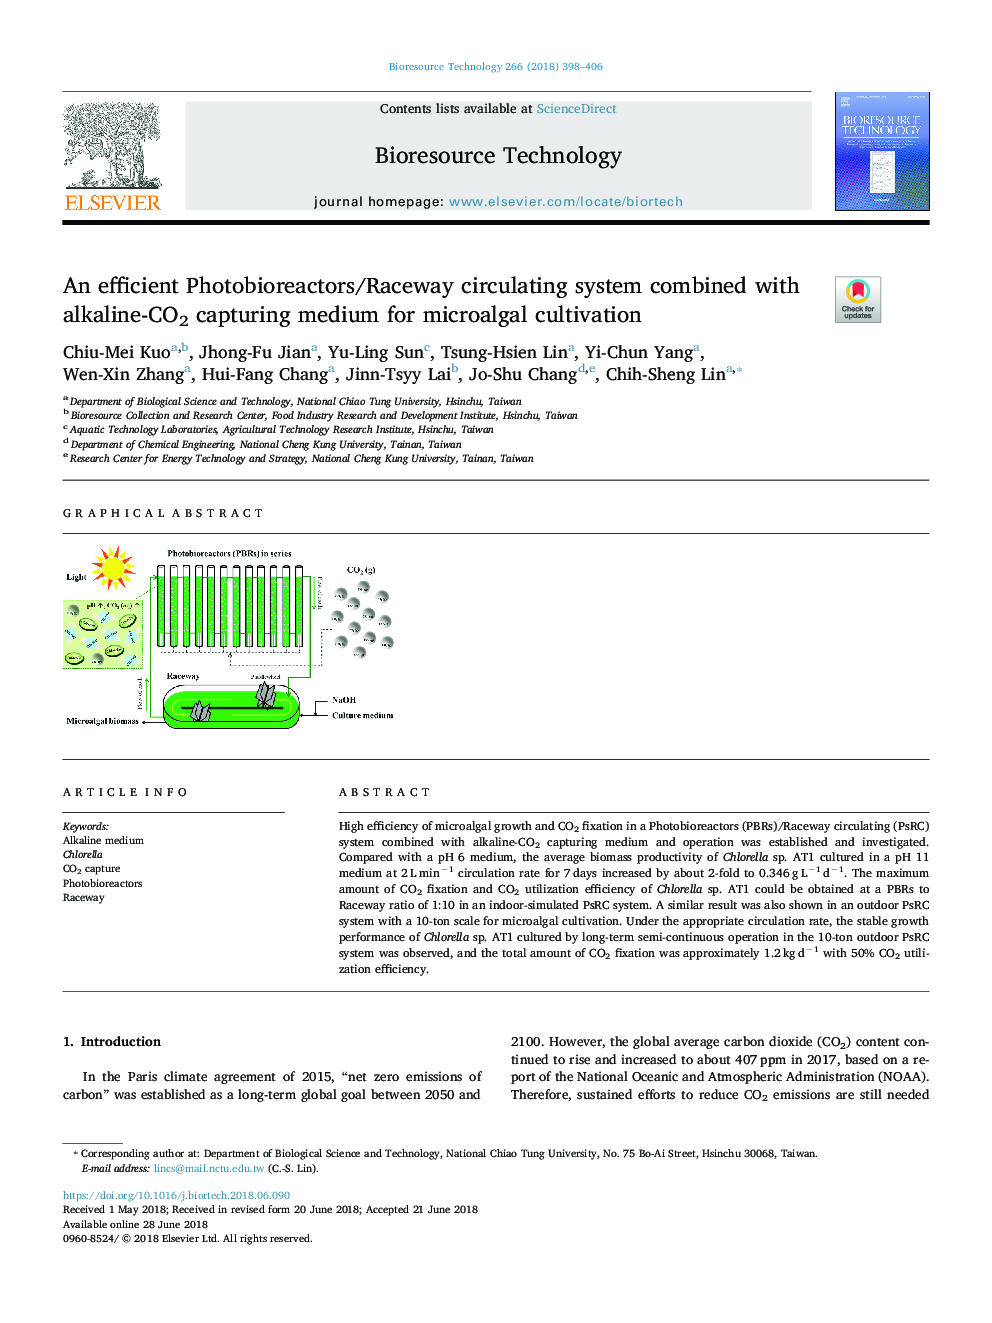 An efficient Photobioreactors/Raceway circulating system combined with alkaline-CO2 capturing medium for microalgal cultivation